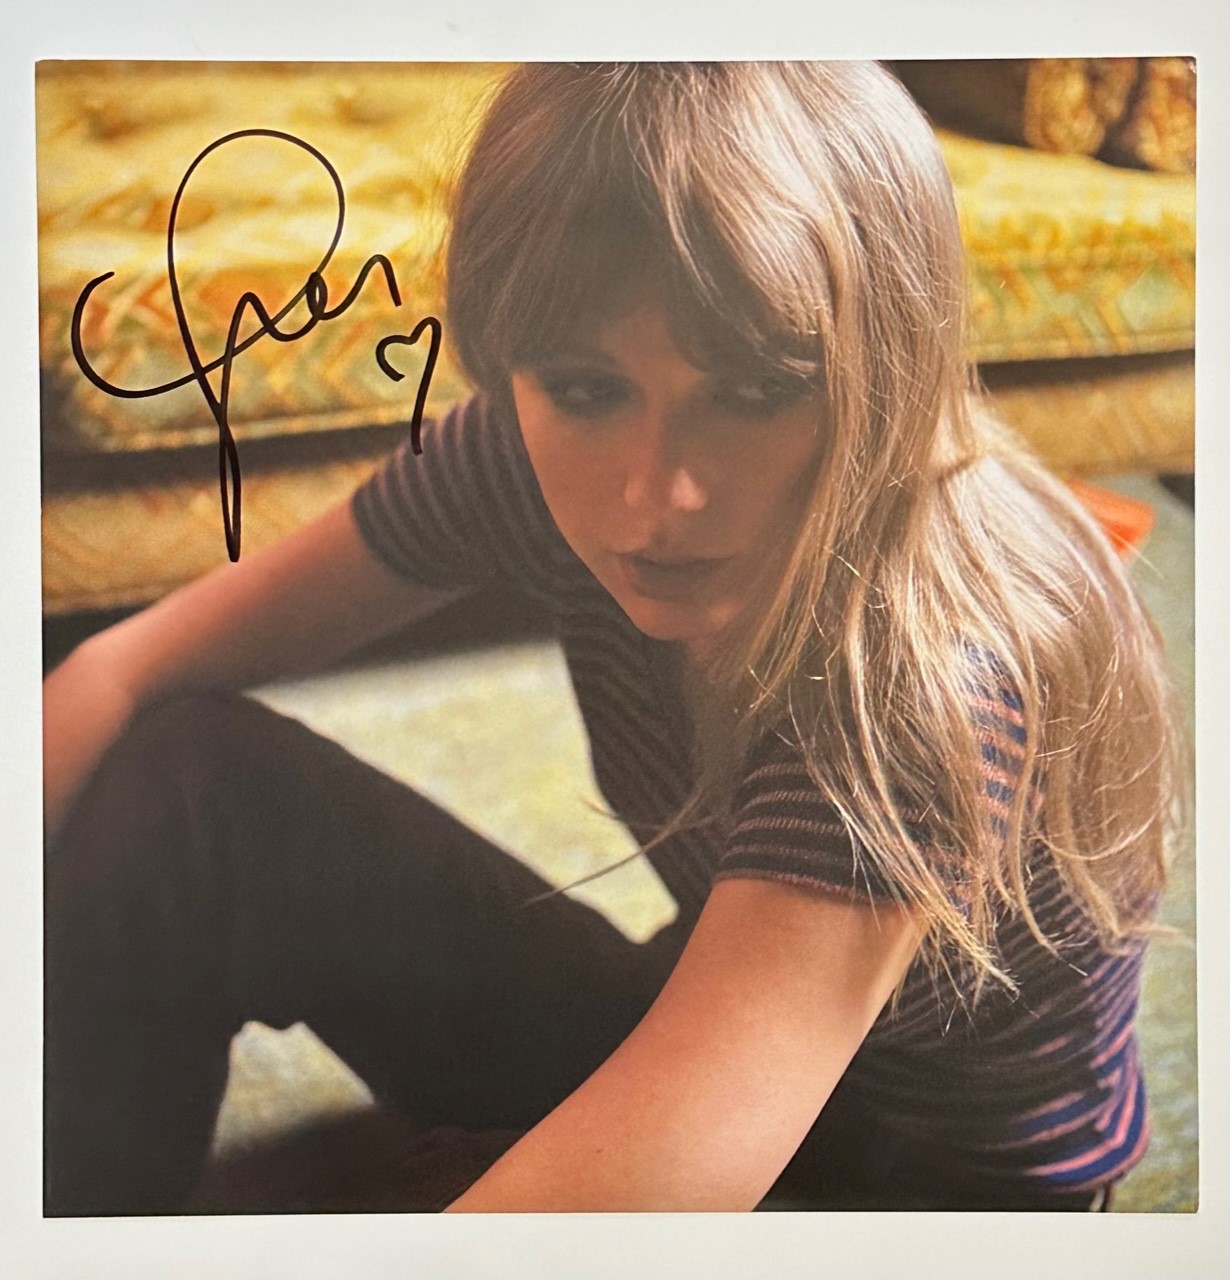 Signed Midnights vinyl now available on the US store! : r/TaylorSwift